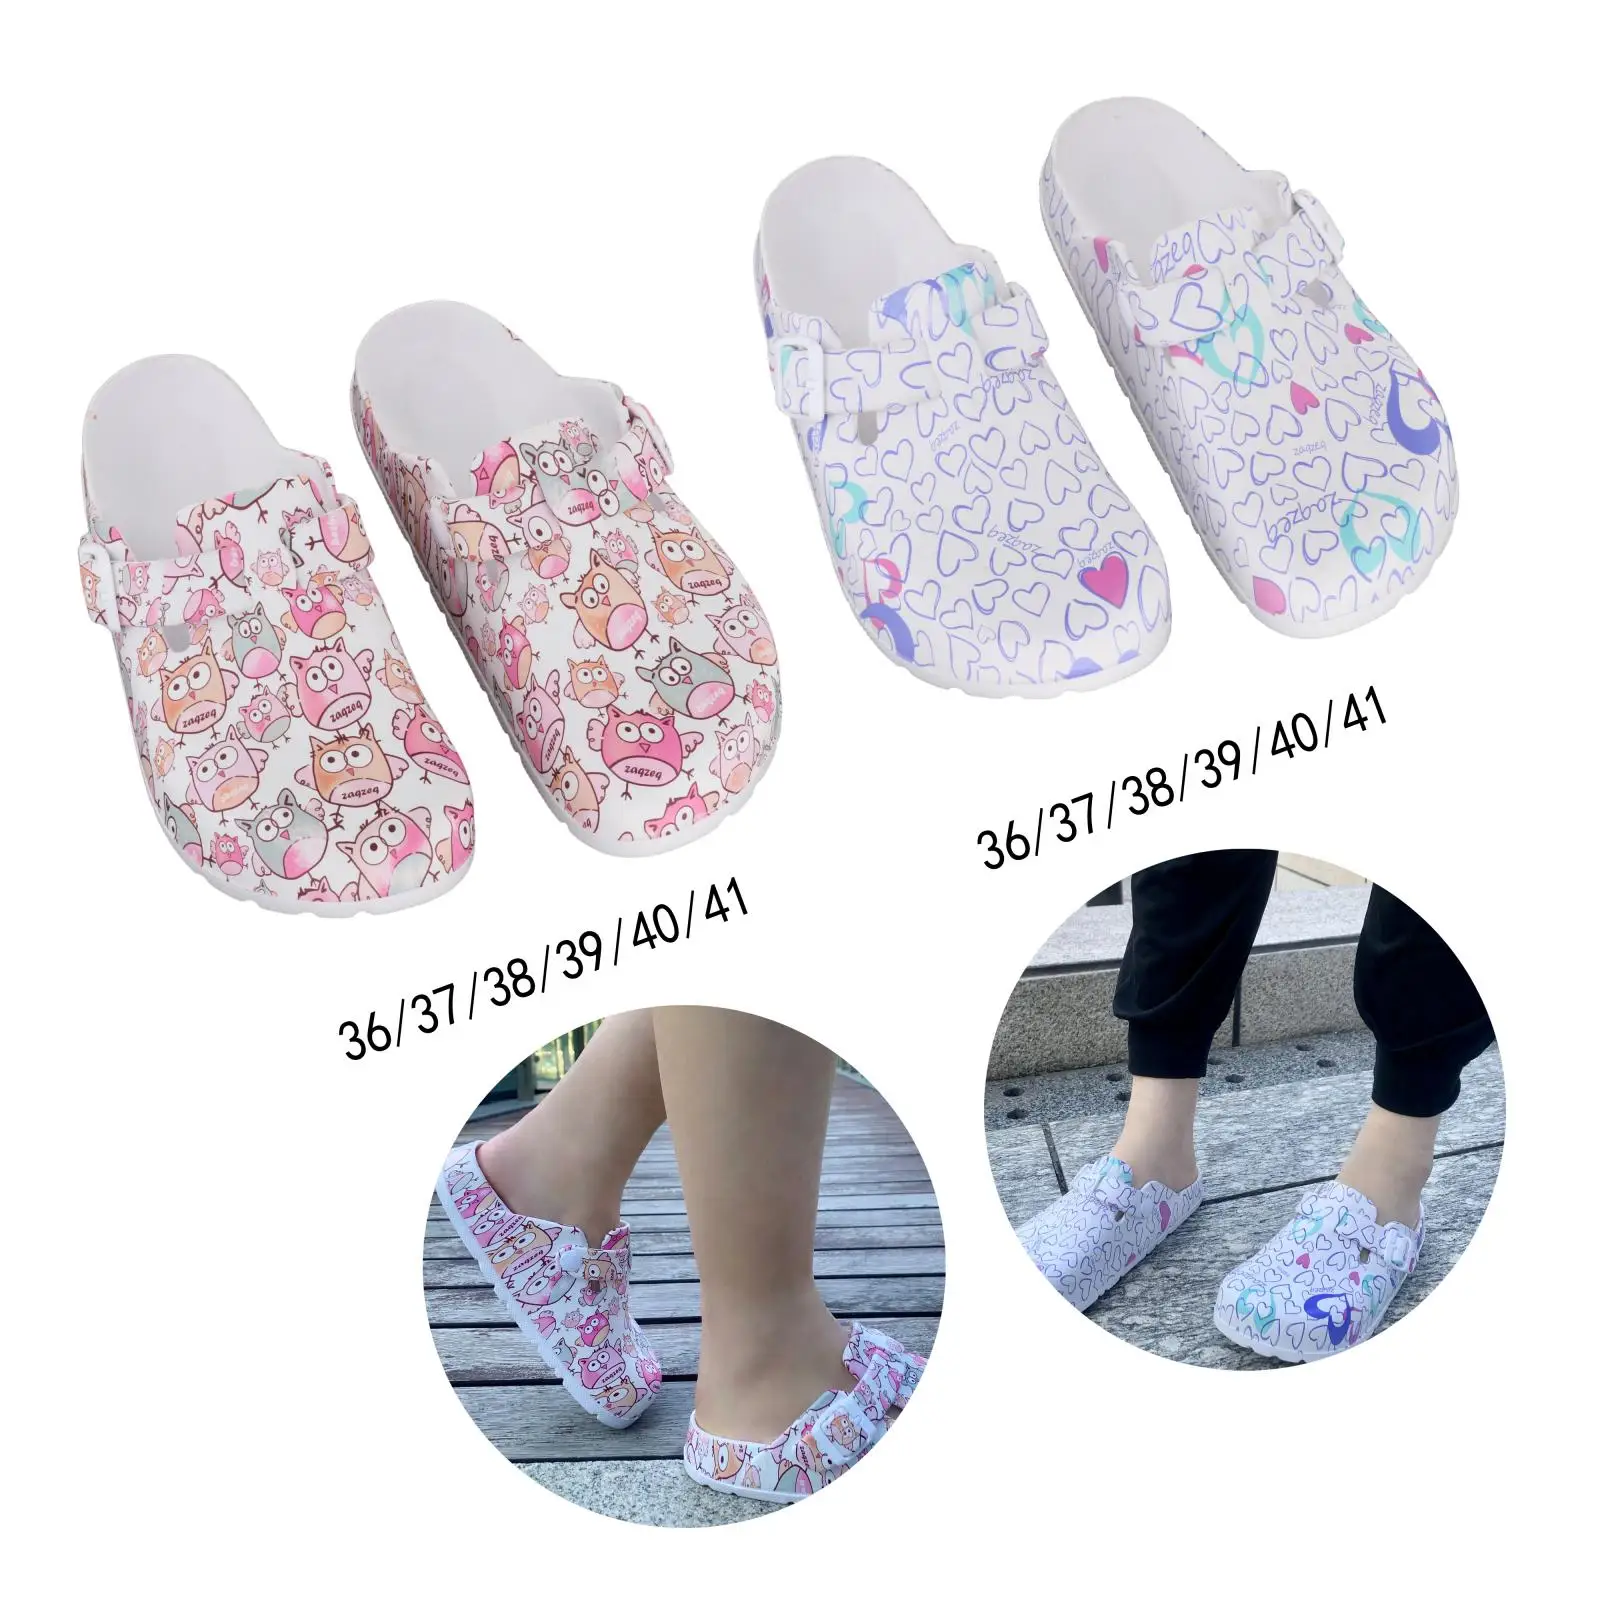 Womens Operating Room Work Nursing Clogs Shoes -Anti Slip Chef Shoes Slipers Waterproof Casual Comfort Indoor Home Flat Shoes